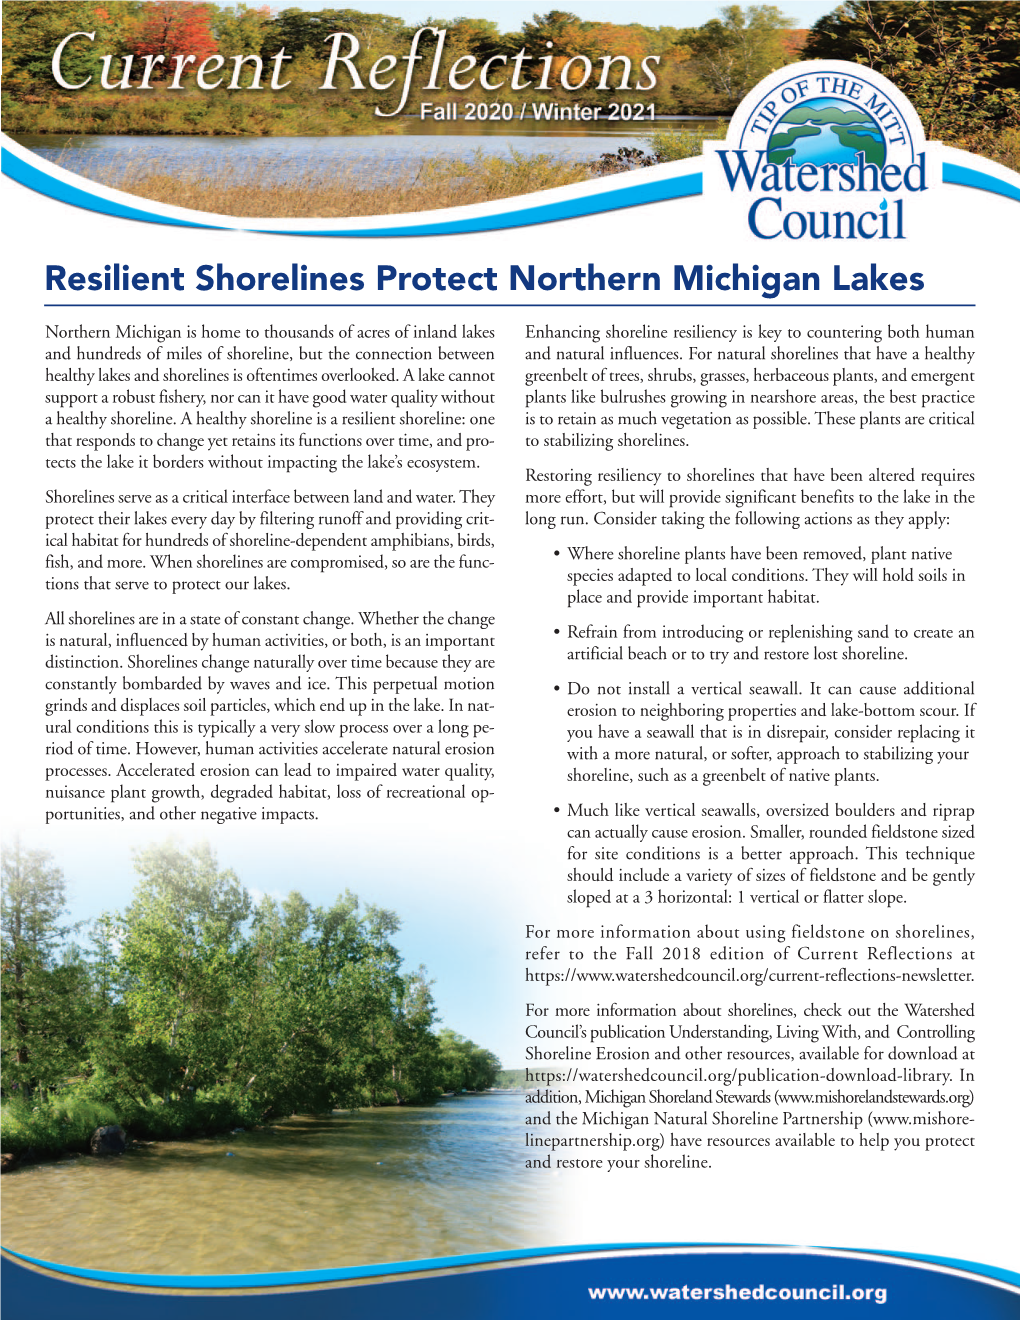 Resilient Shorelines Protect Northern Michigan Lakes